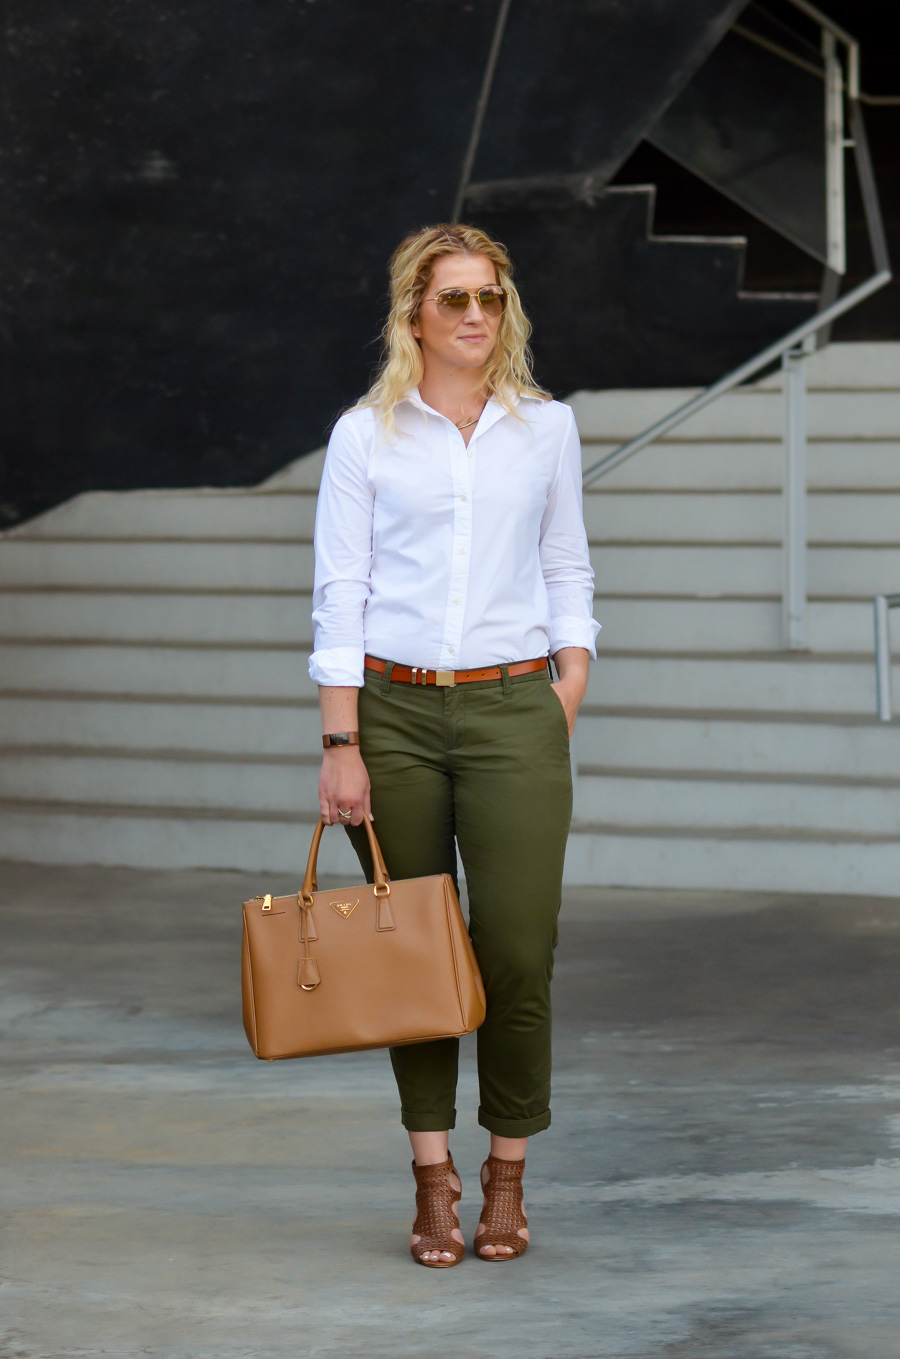 How to Dress Up Olive Green Chinos Outfit